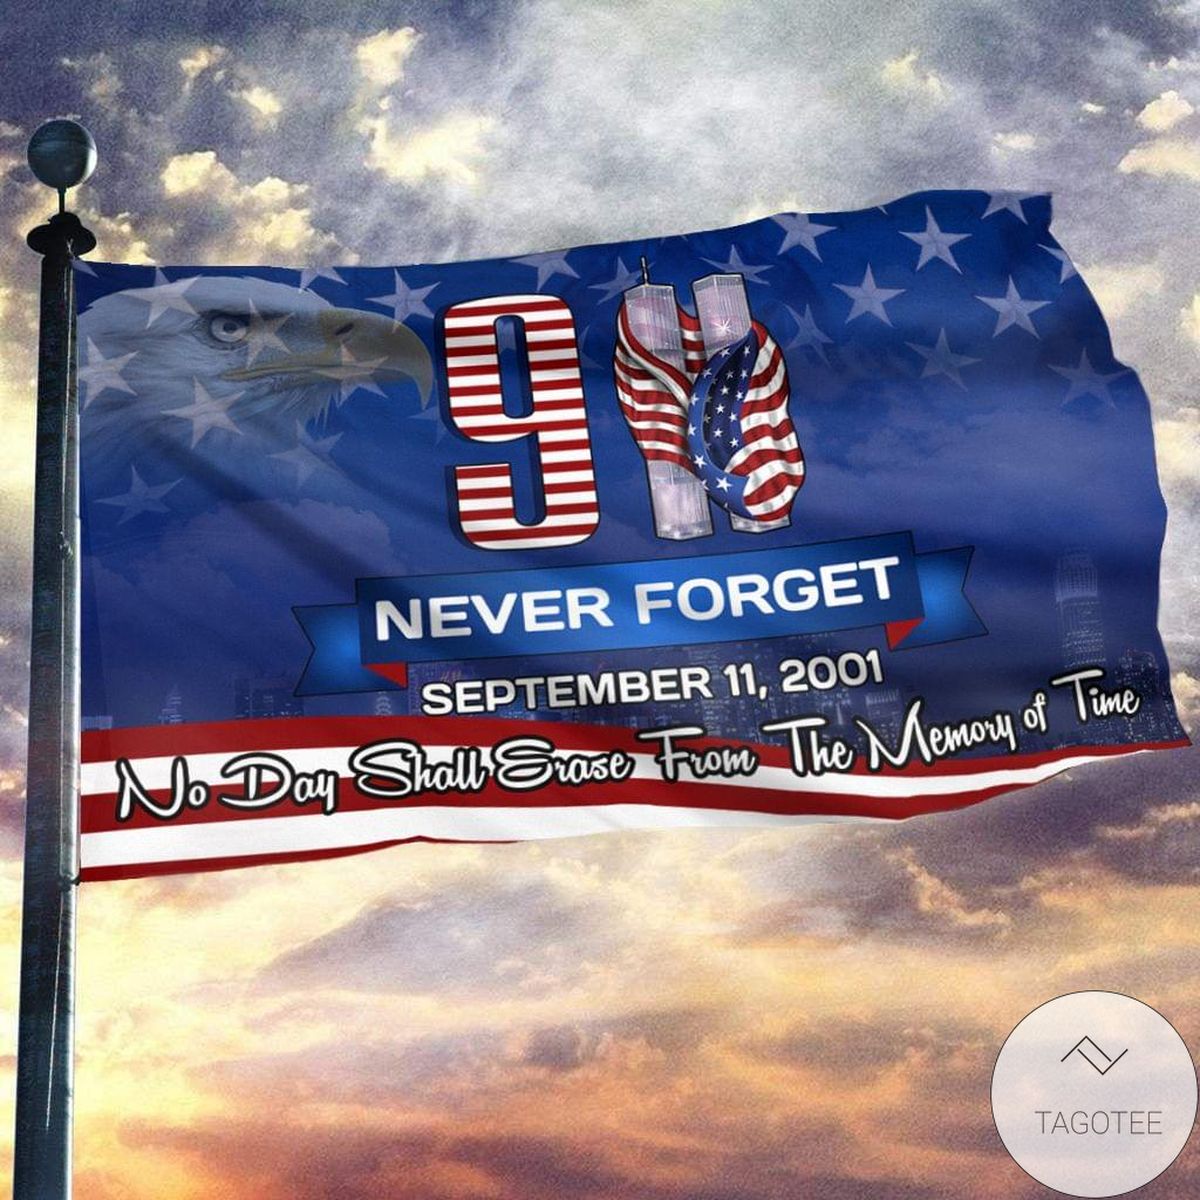 Never Forget September 11 So Day Shall Erase From The Memory Of Time House Flag